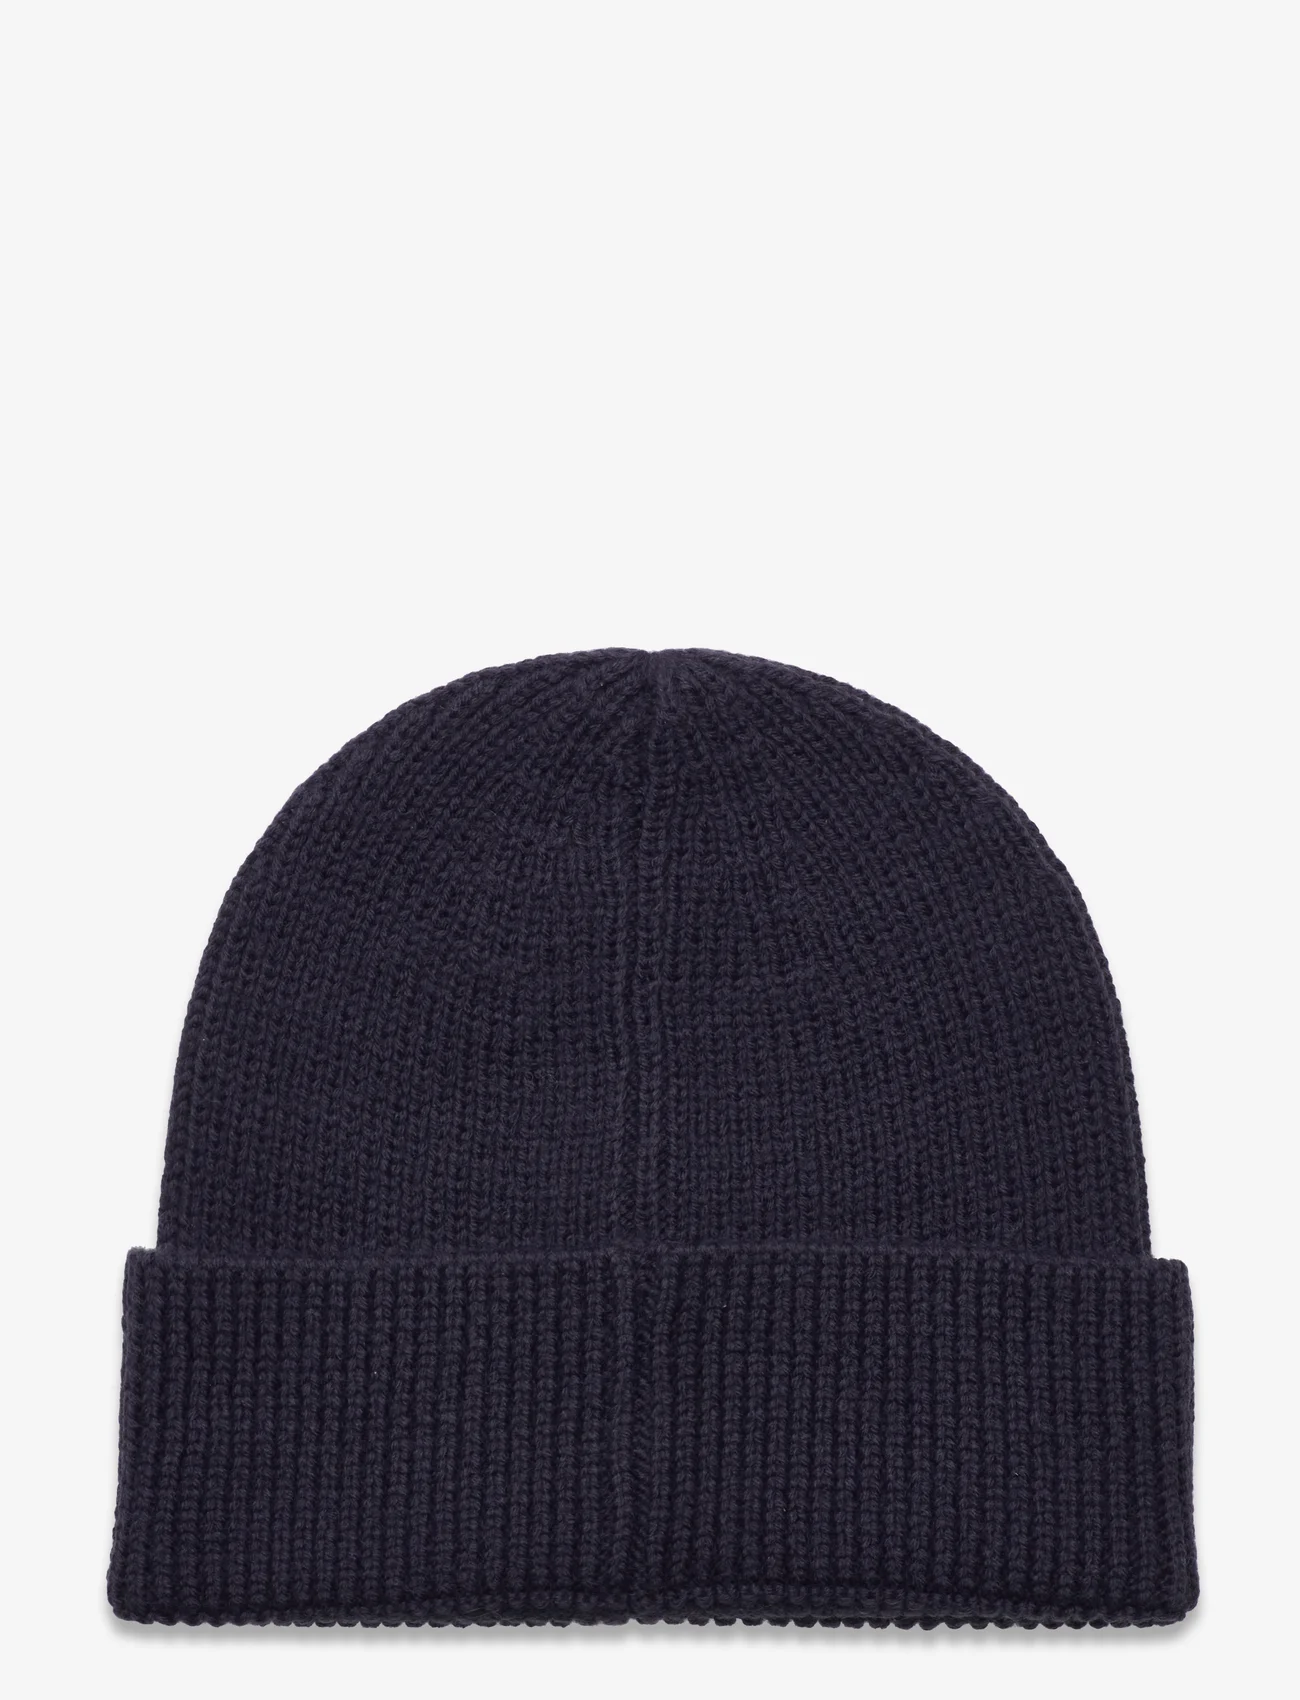 Double A by Wood Wood - Vin logo beanie - beanies - navy - 1